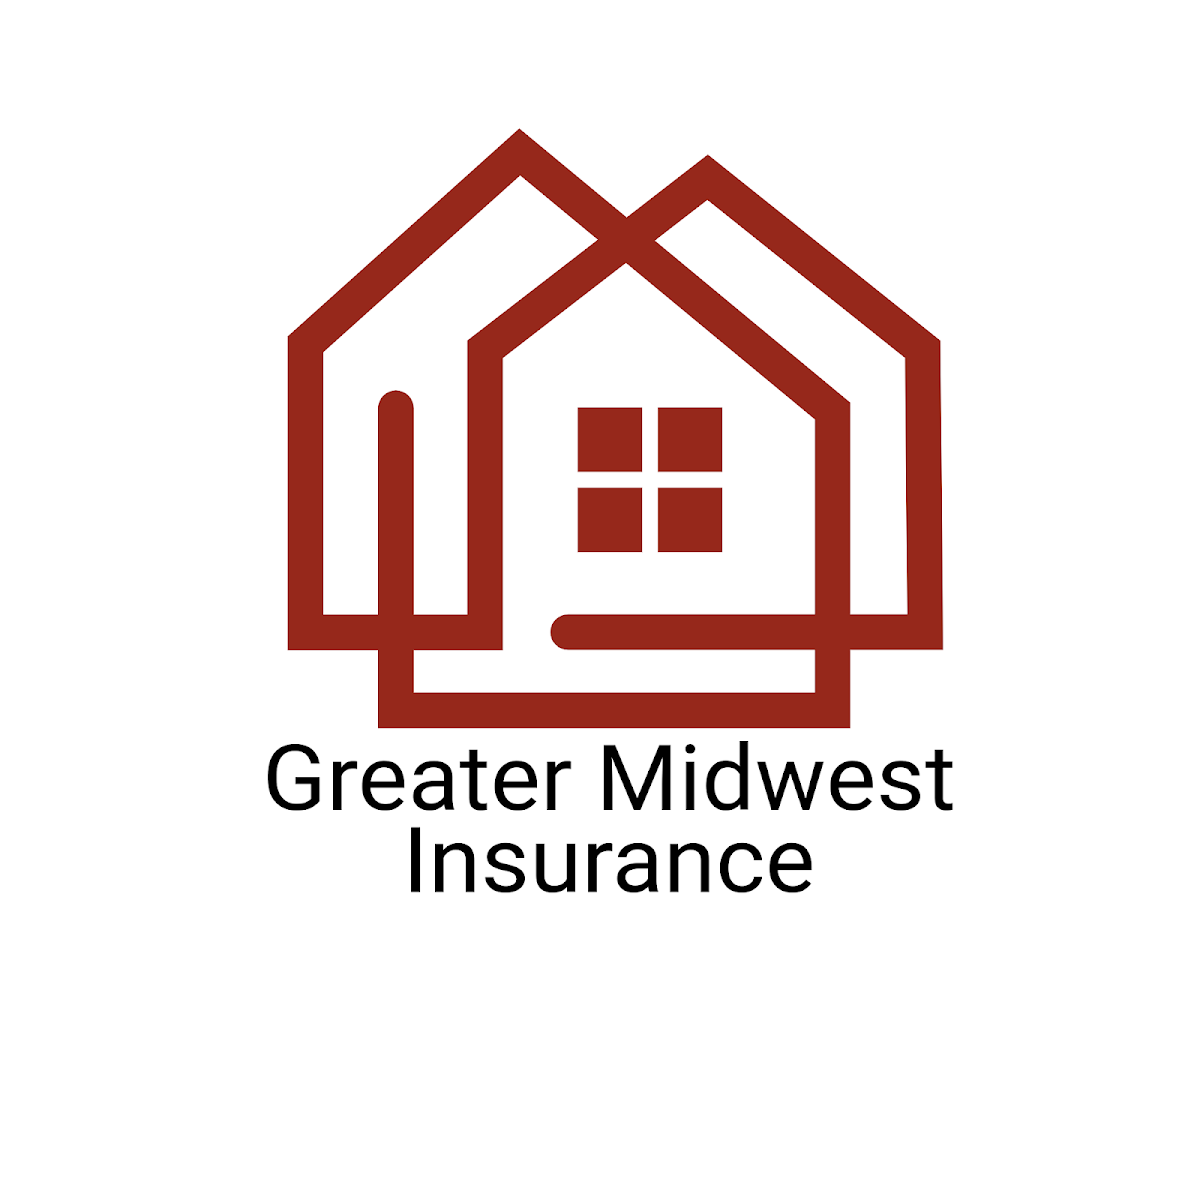 Greater Midwest Insurance Company